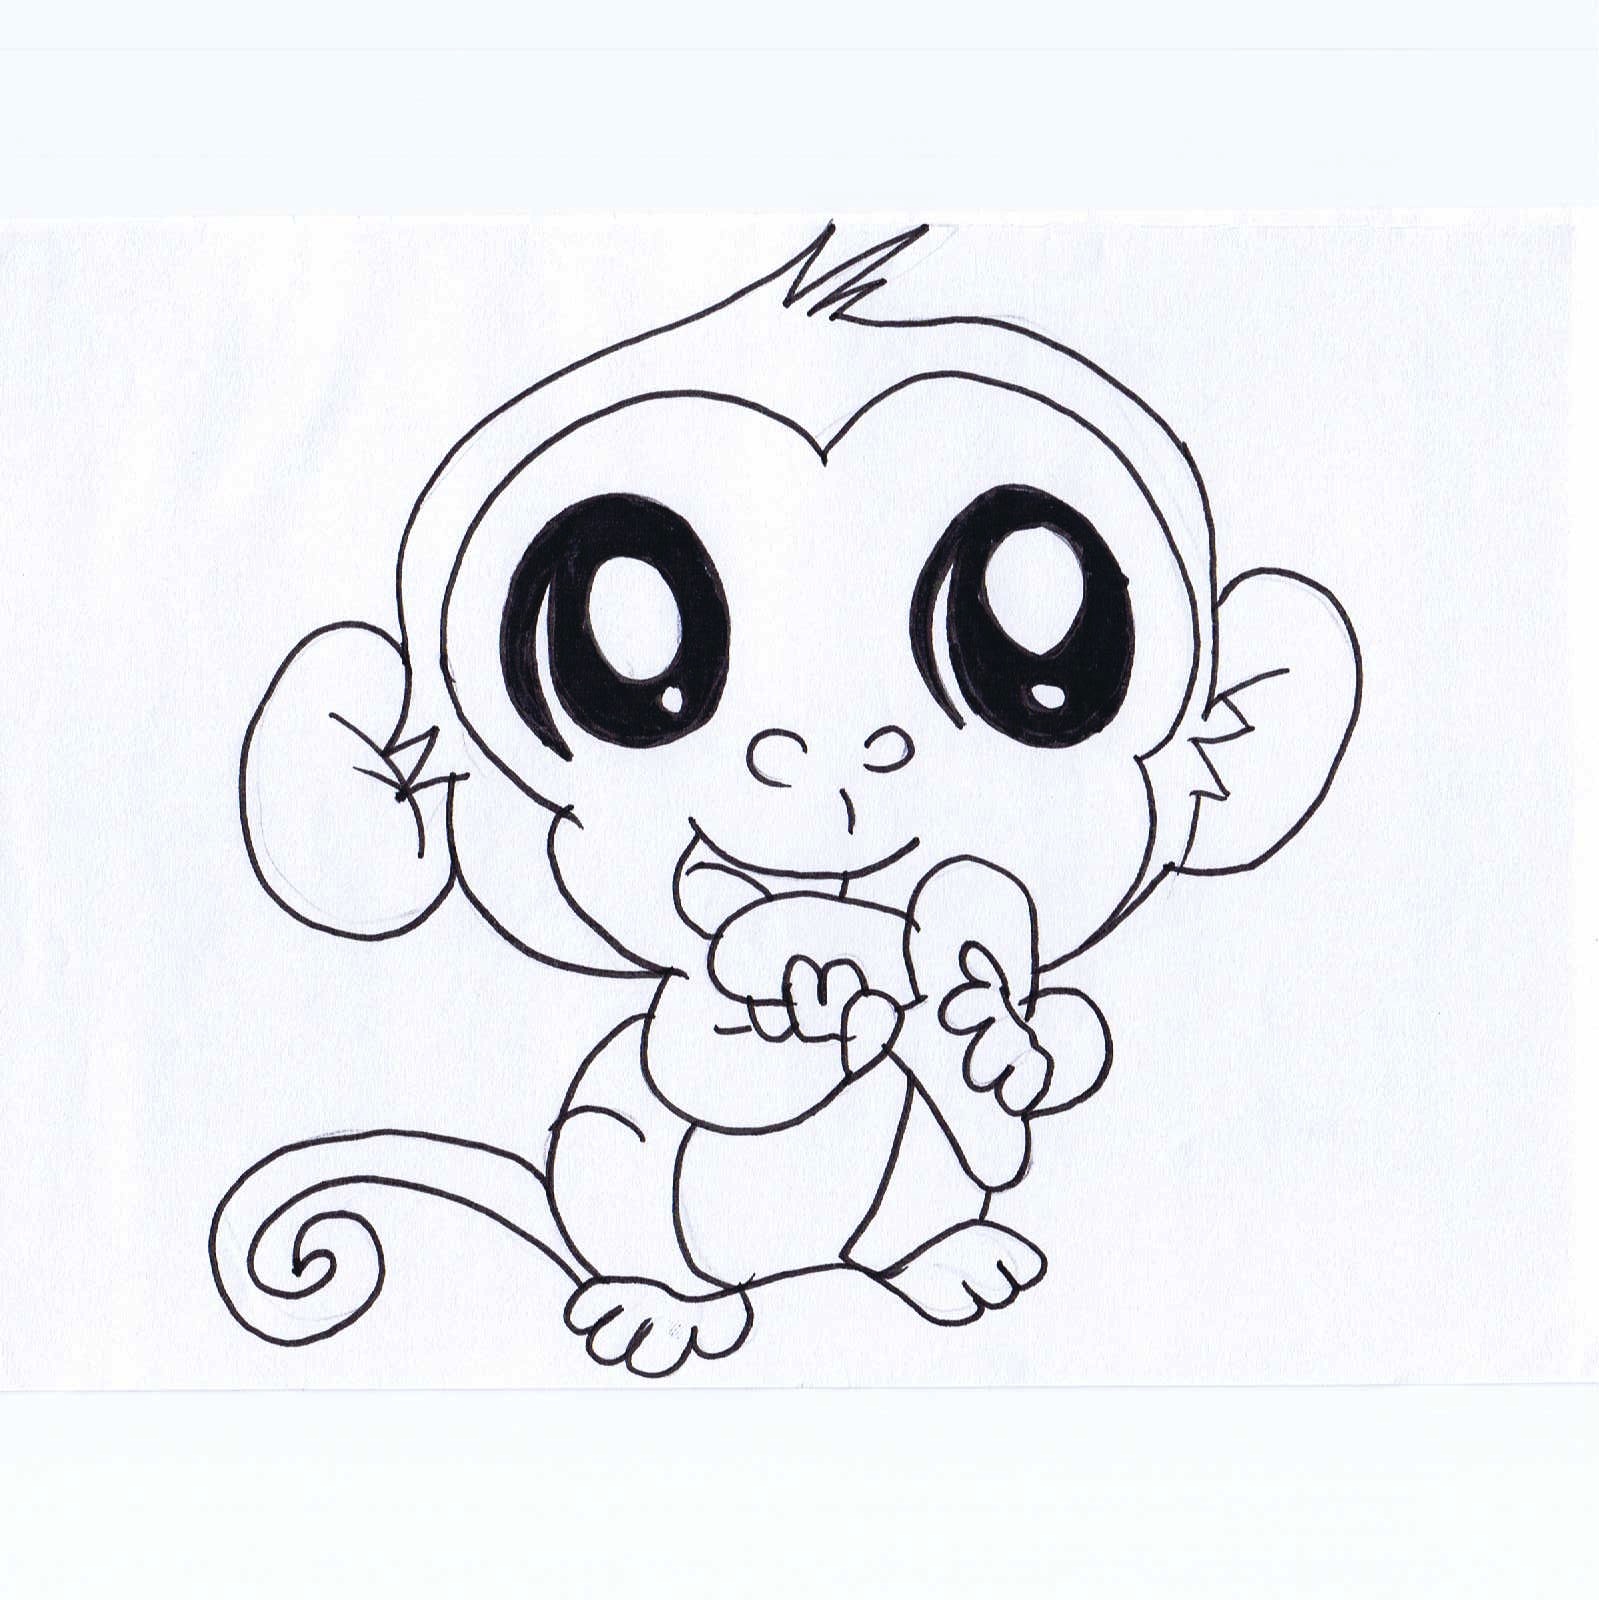 Drawing Images Monkey - Drawing images ideas